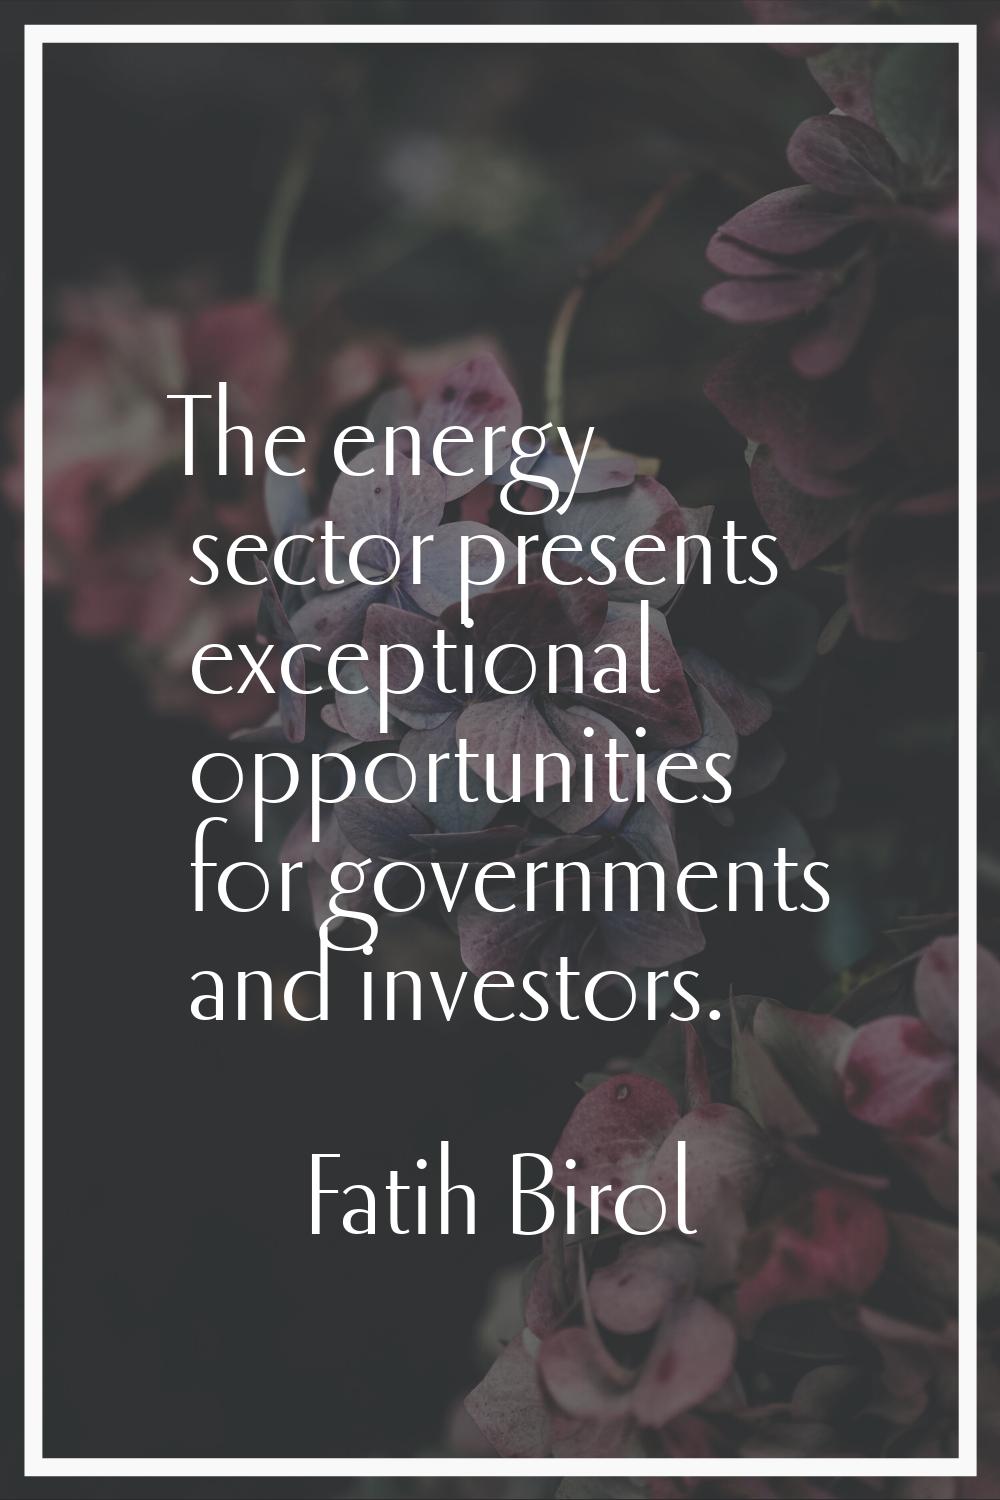 The energy sector presents exceptional opportunities for governments and investors.